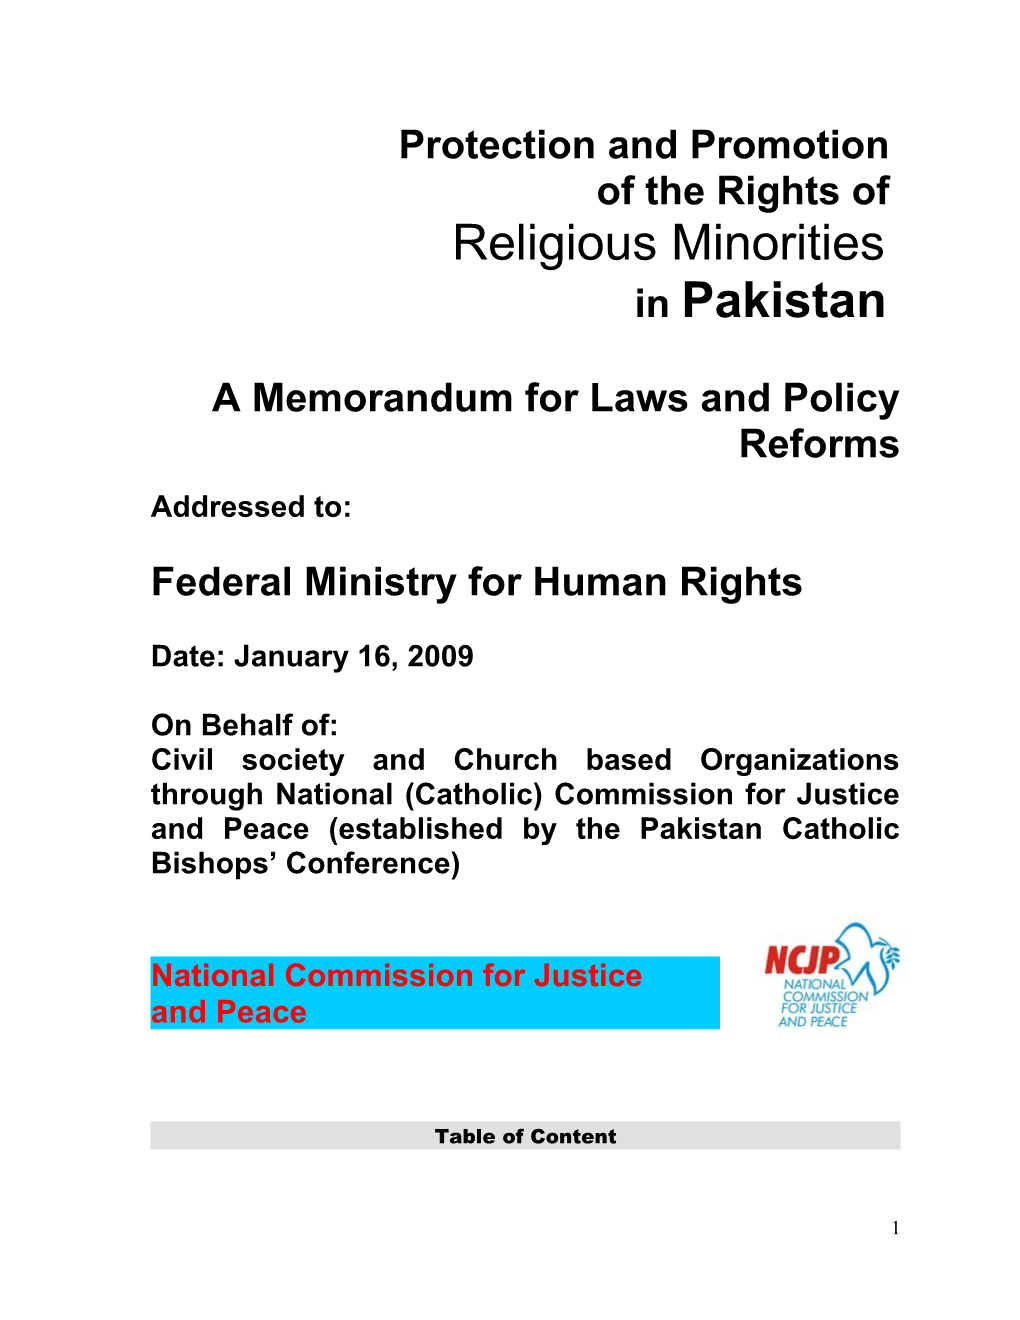 Key Issues Concerning Religious Minorities in Pakistan